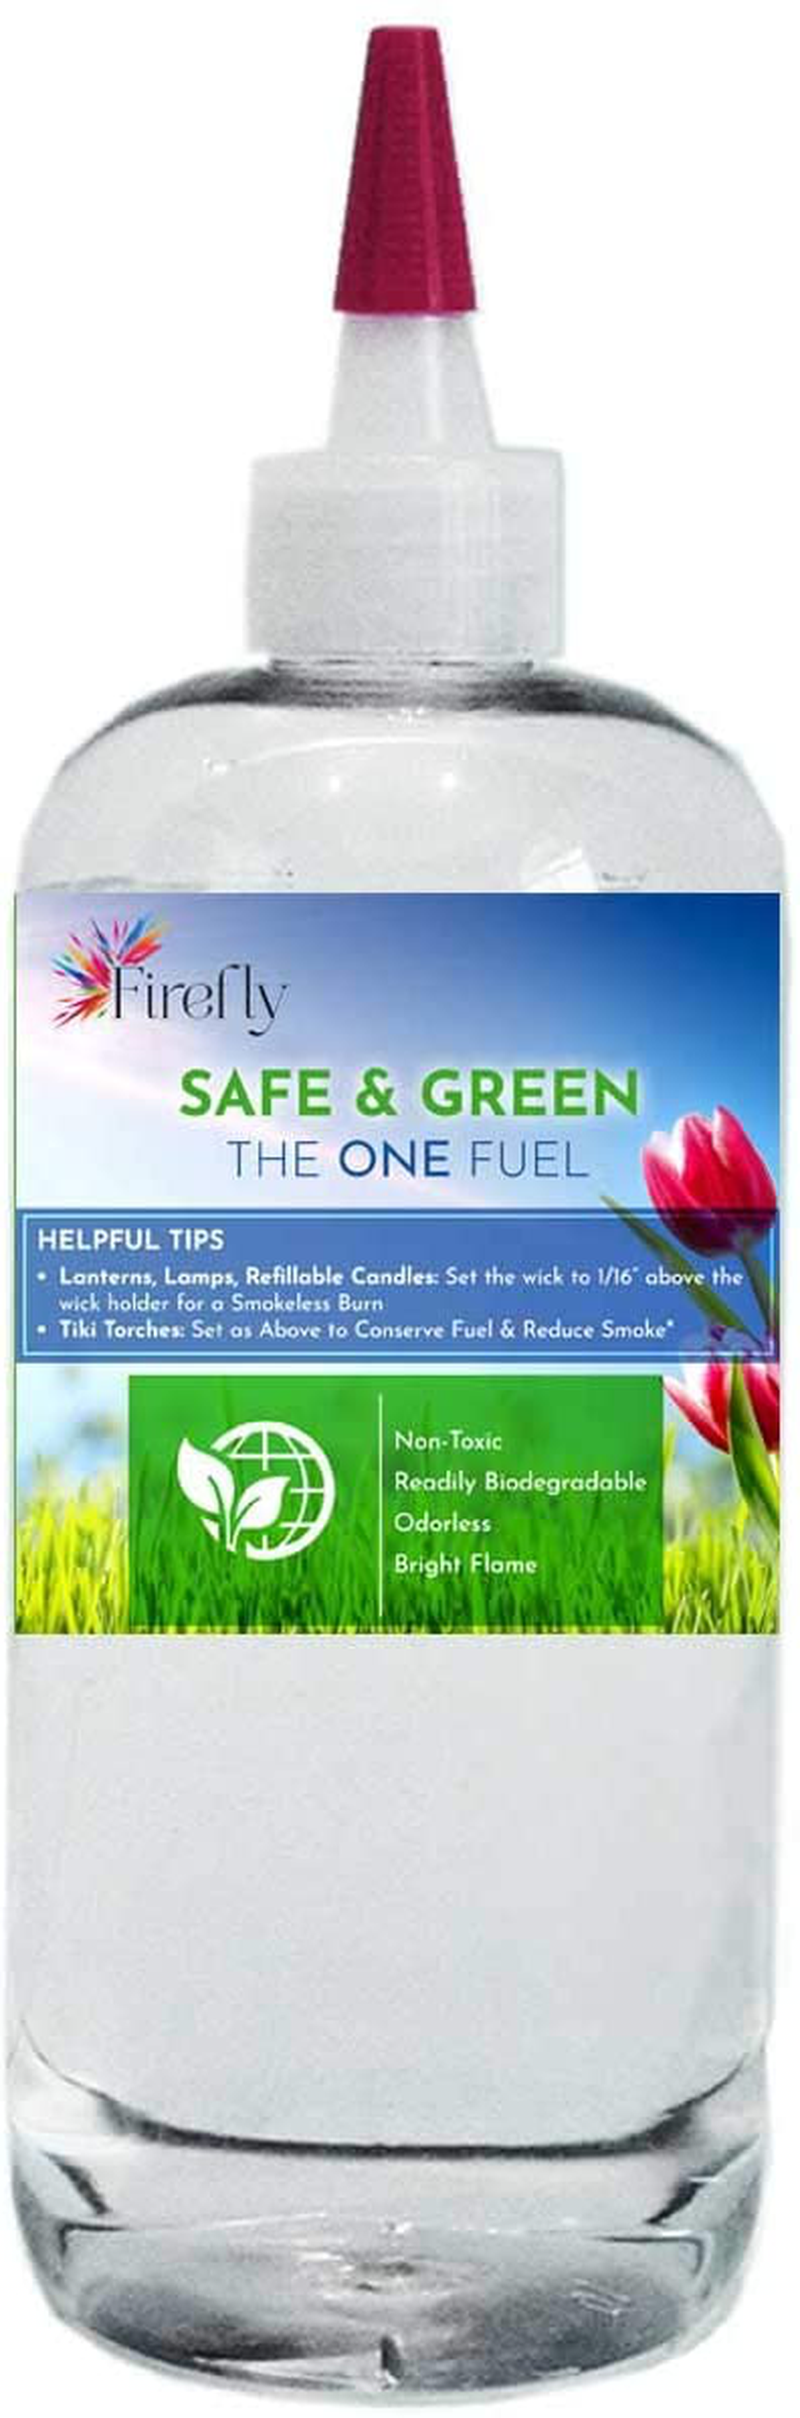 Firefly Kosher Safe and Green Eco-Friendly Lamp Oil - Non Toxic - Biodegradable - Virtually Odorless - Paraffin Alternative - Indoor Outdoor Use - Lamps, Lanterns, Candles, Patio Tiki Torches - 16 Oz Home & Garden > Lighting Accessories > Oil Lamp Fuel Firefly 16 Ounces  